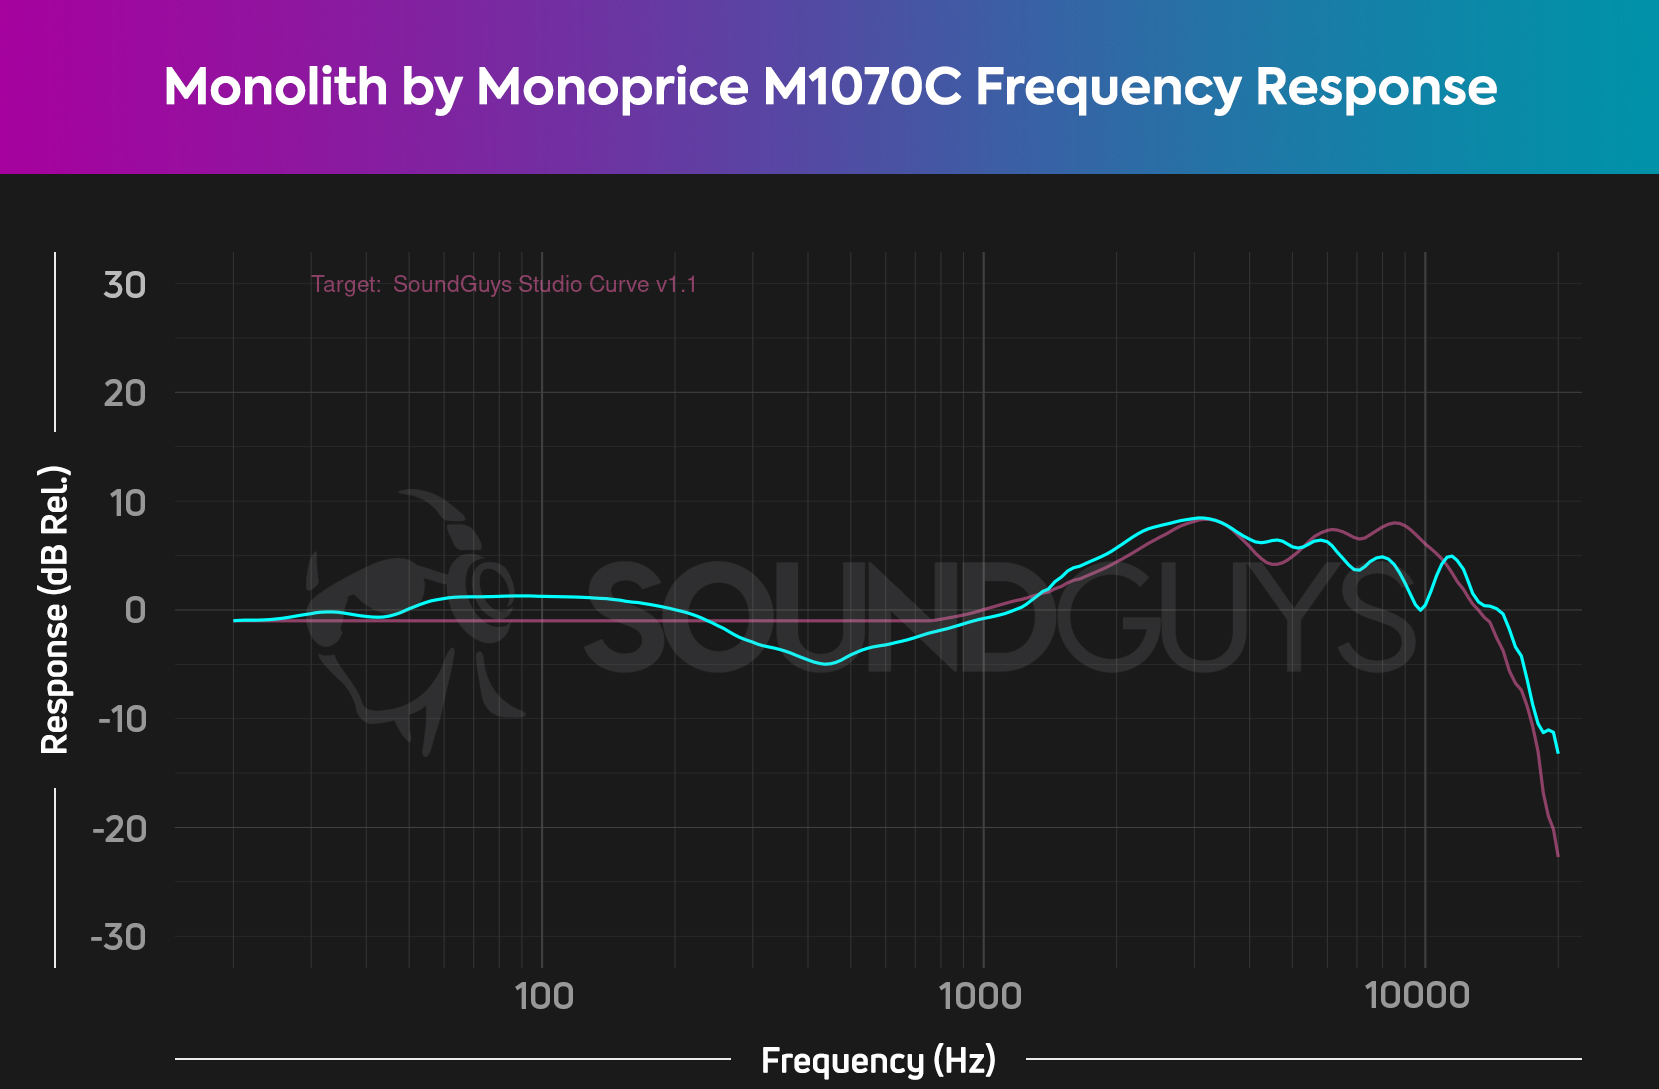 Chart shows the frequency response of the Monolith by Monoprice M1070C compared to our target curve.